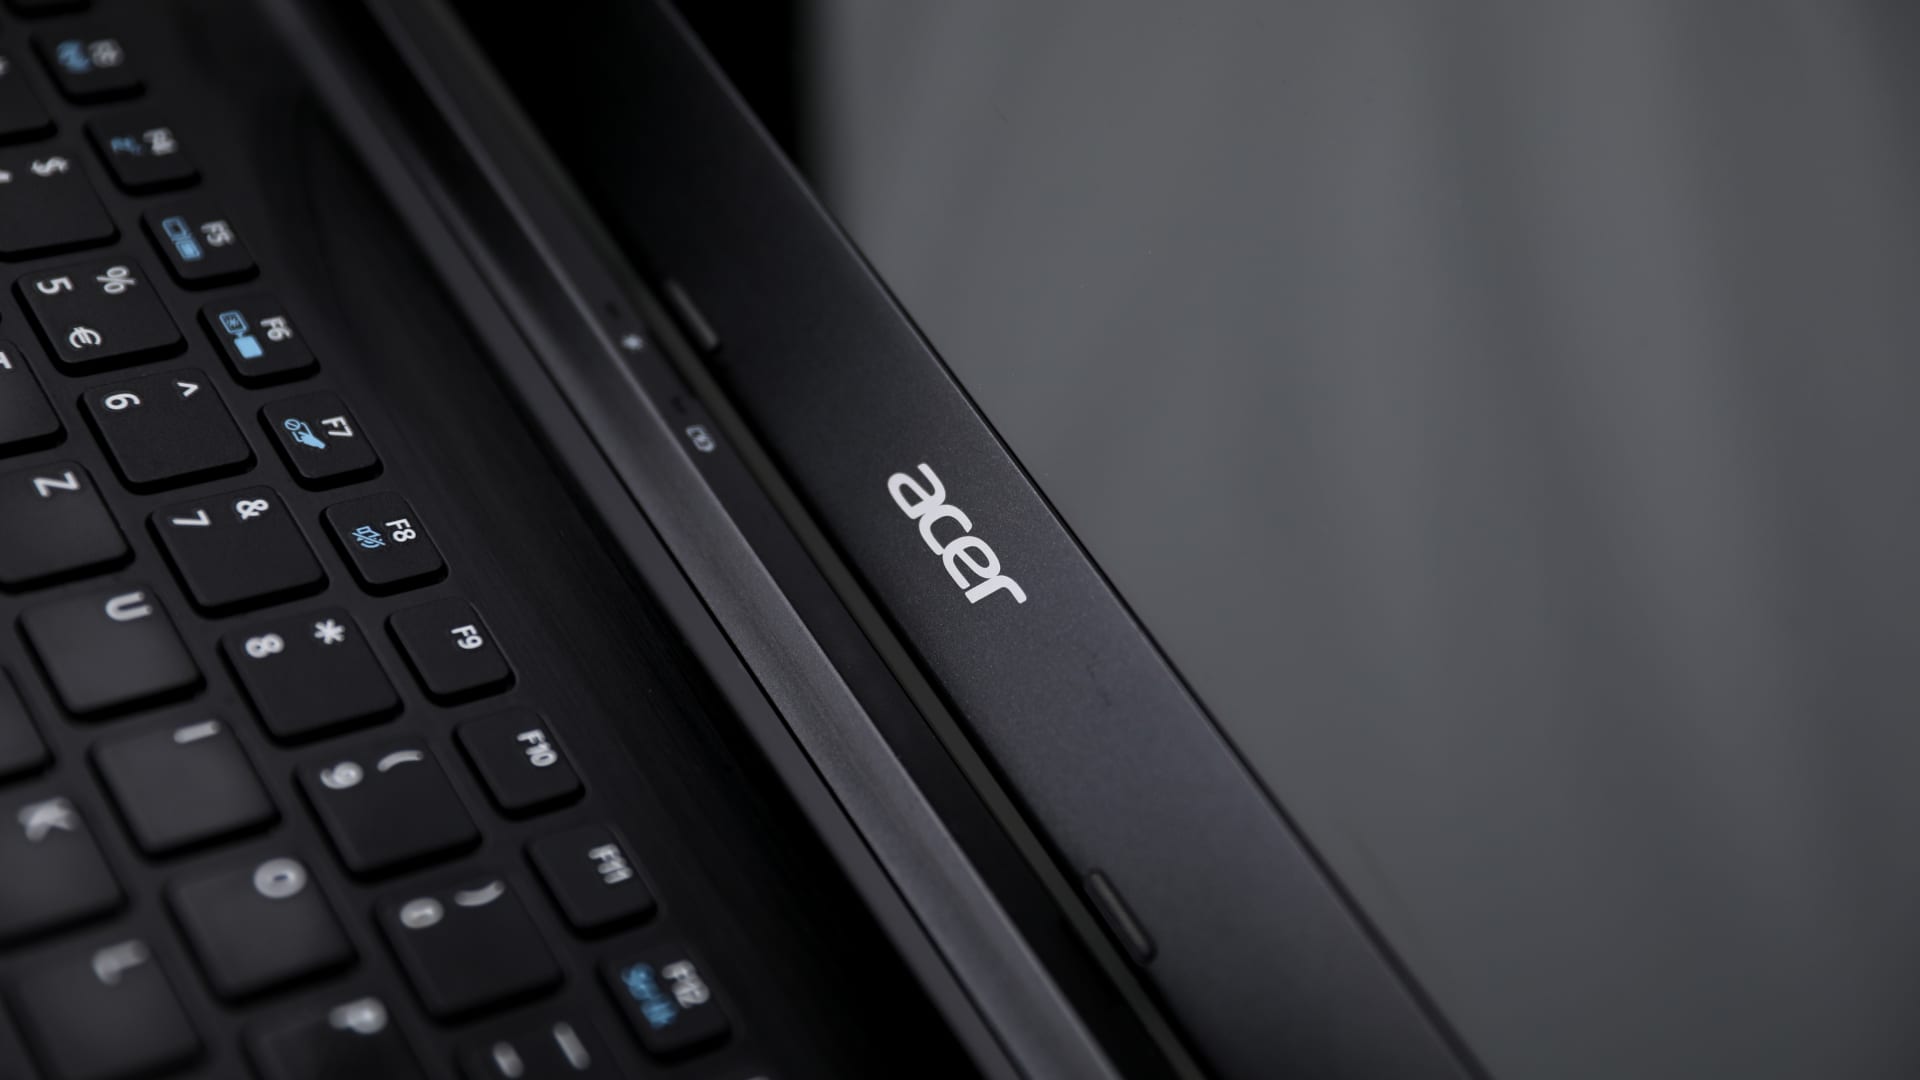 PC demand is back, says Acer CEO who sees robust growth in the 'foreseeable future'